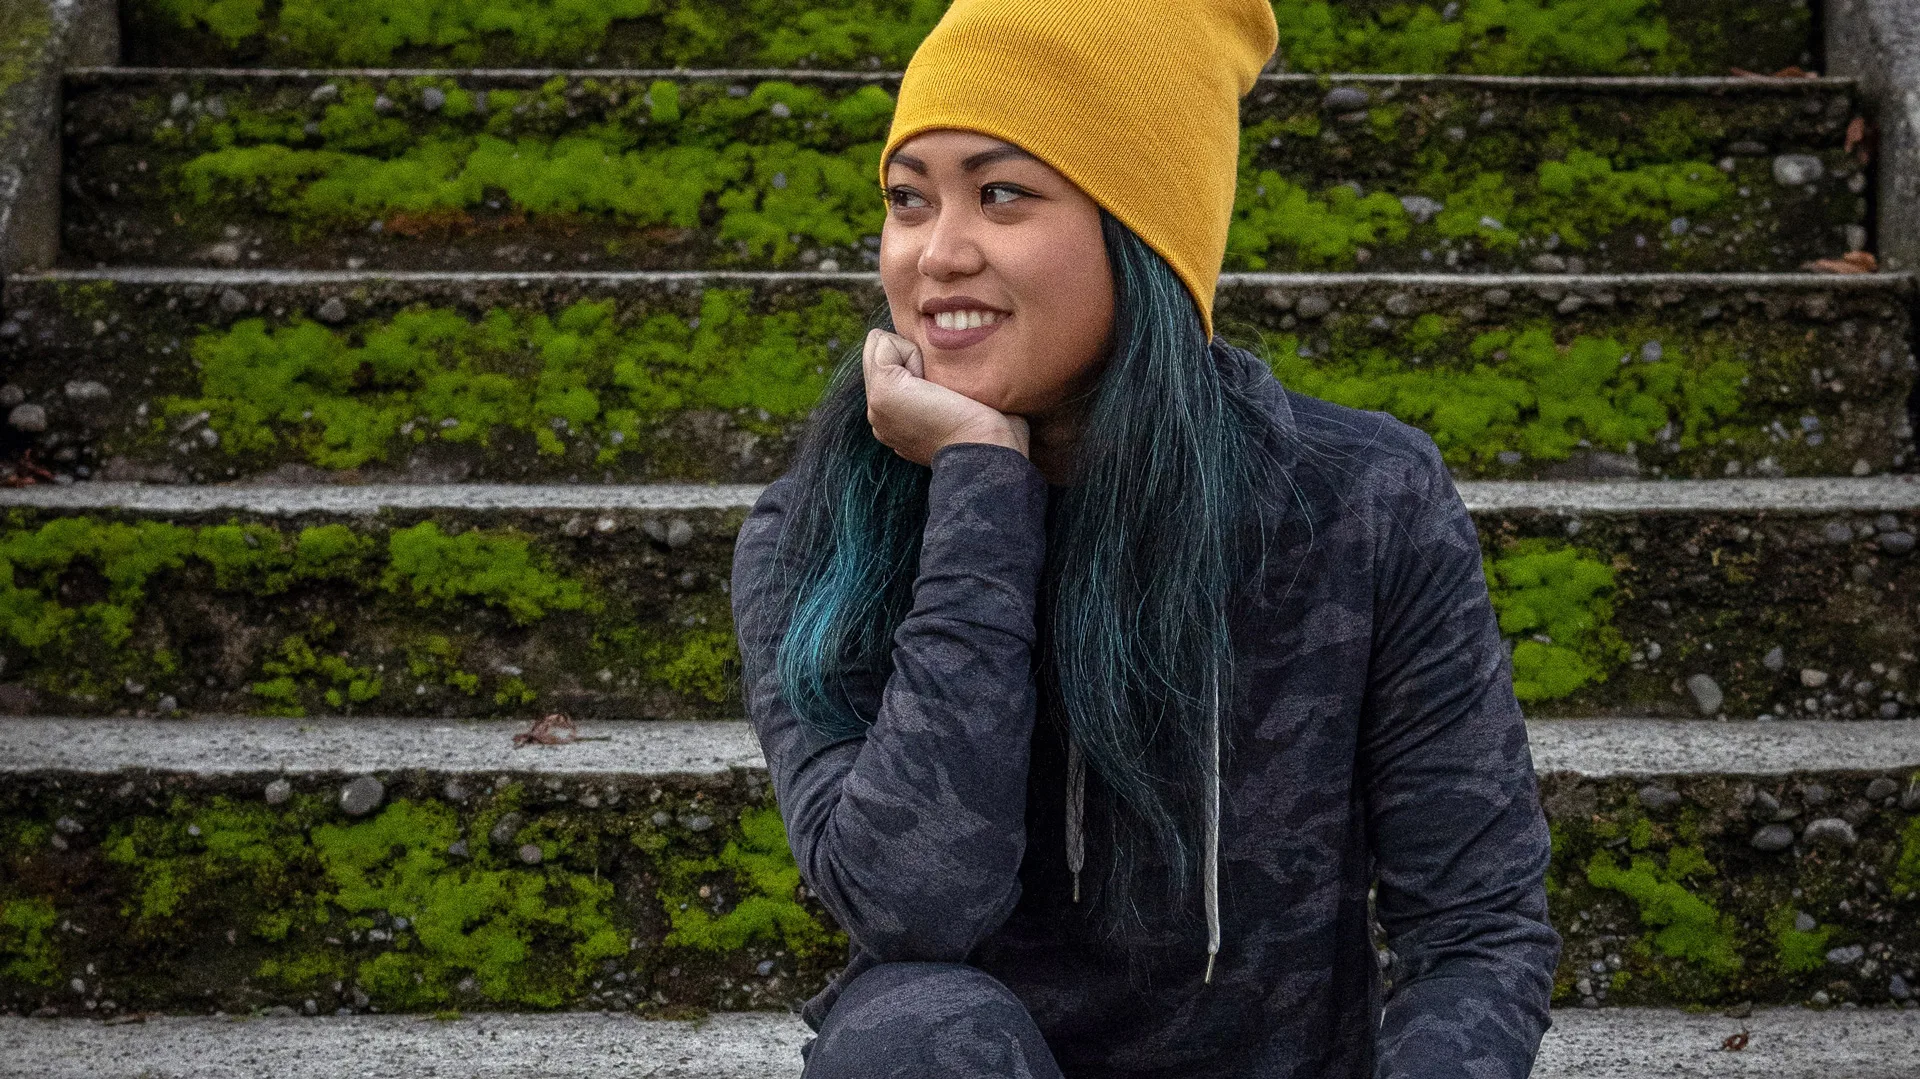 Girl with long hair and yellow beanie sitting on mossy steps